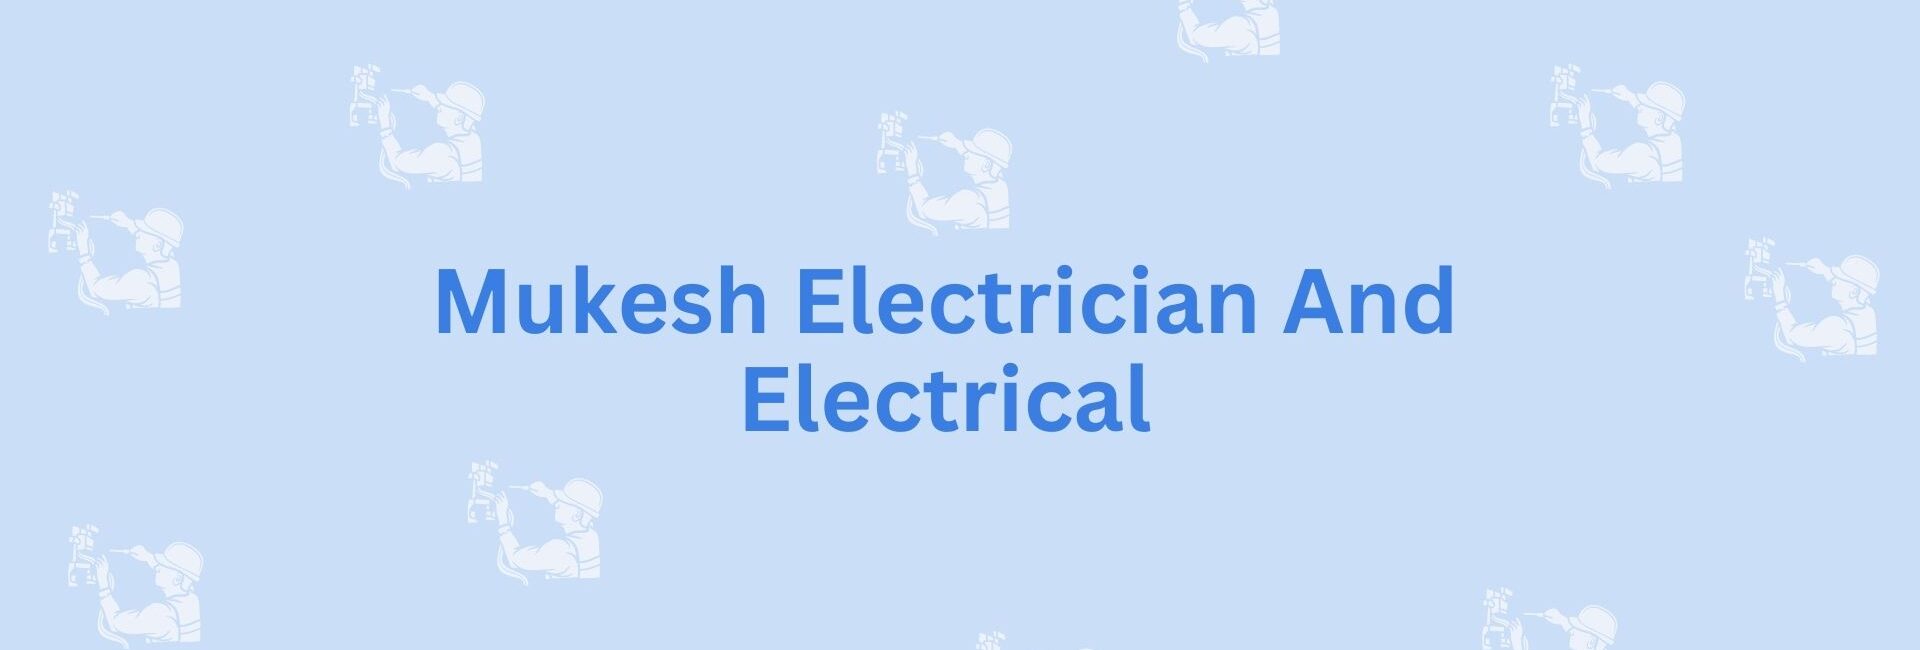 Mukesh Electrician And Electrical- Noida's Electrician Service Provider